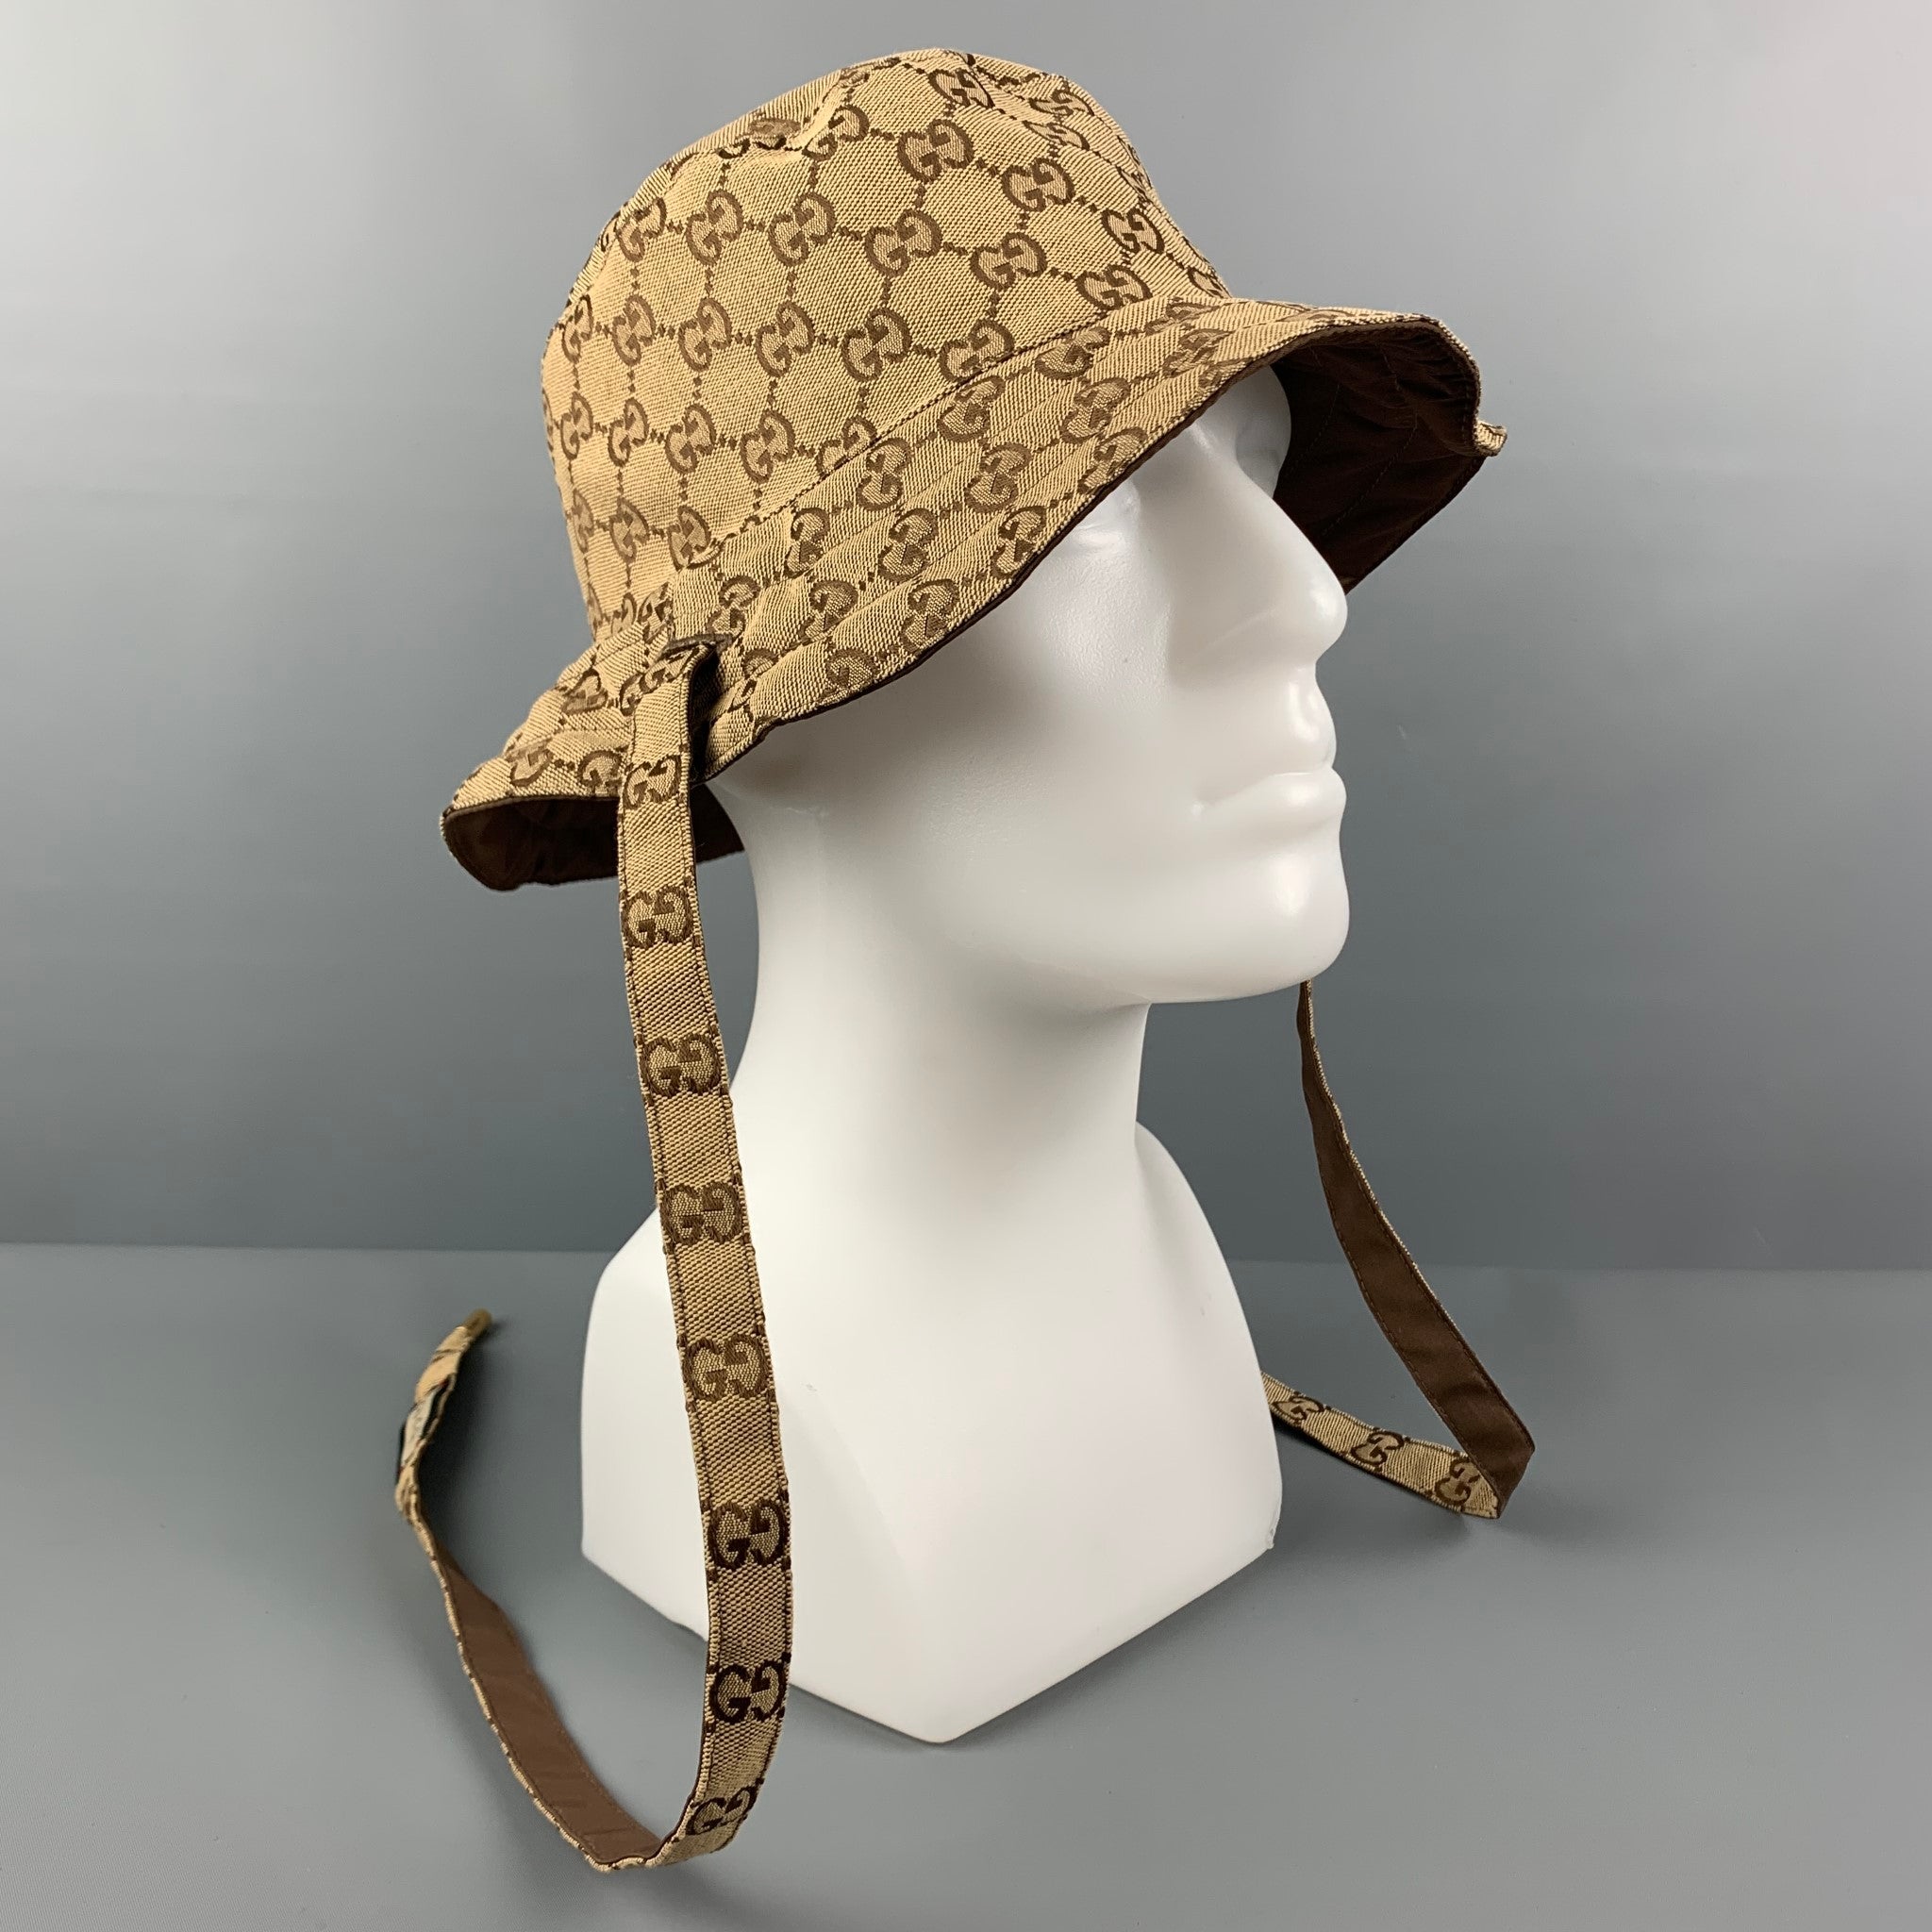 Gucci Bucket Hats for Women for sale